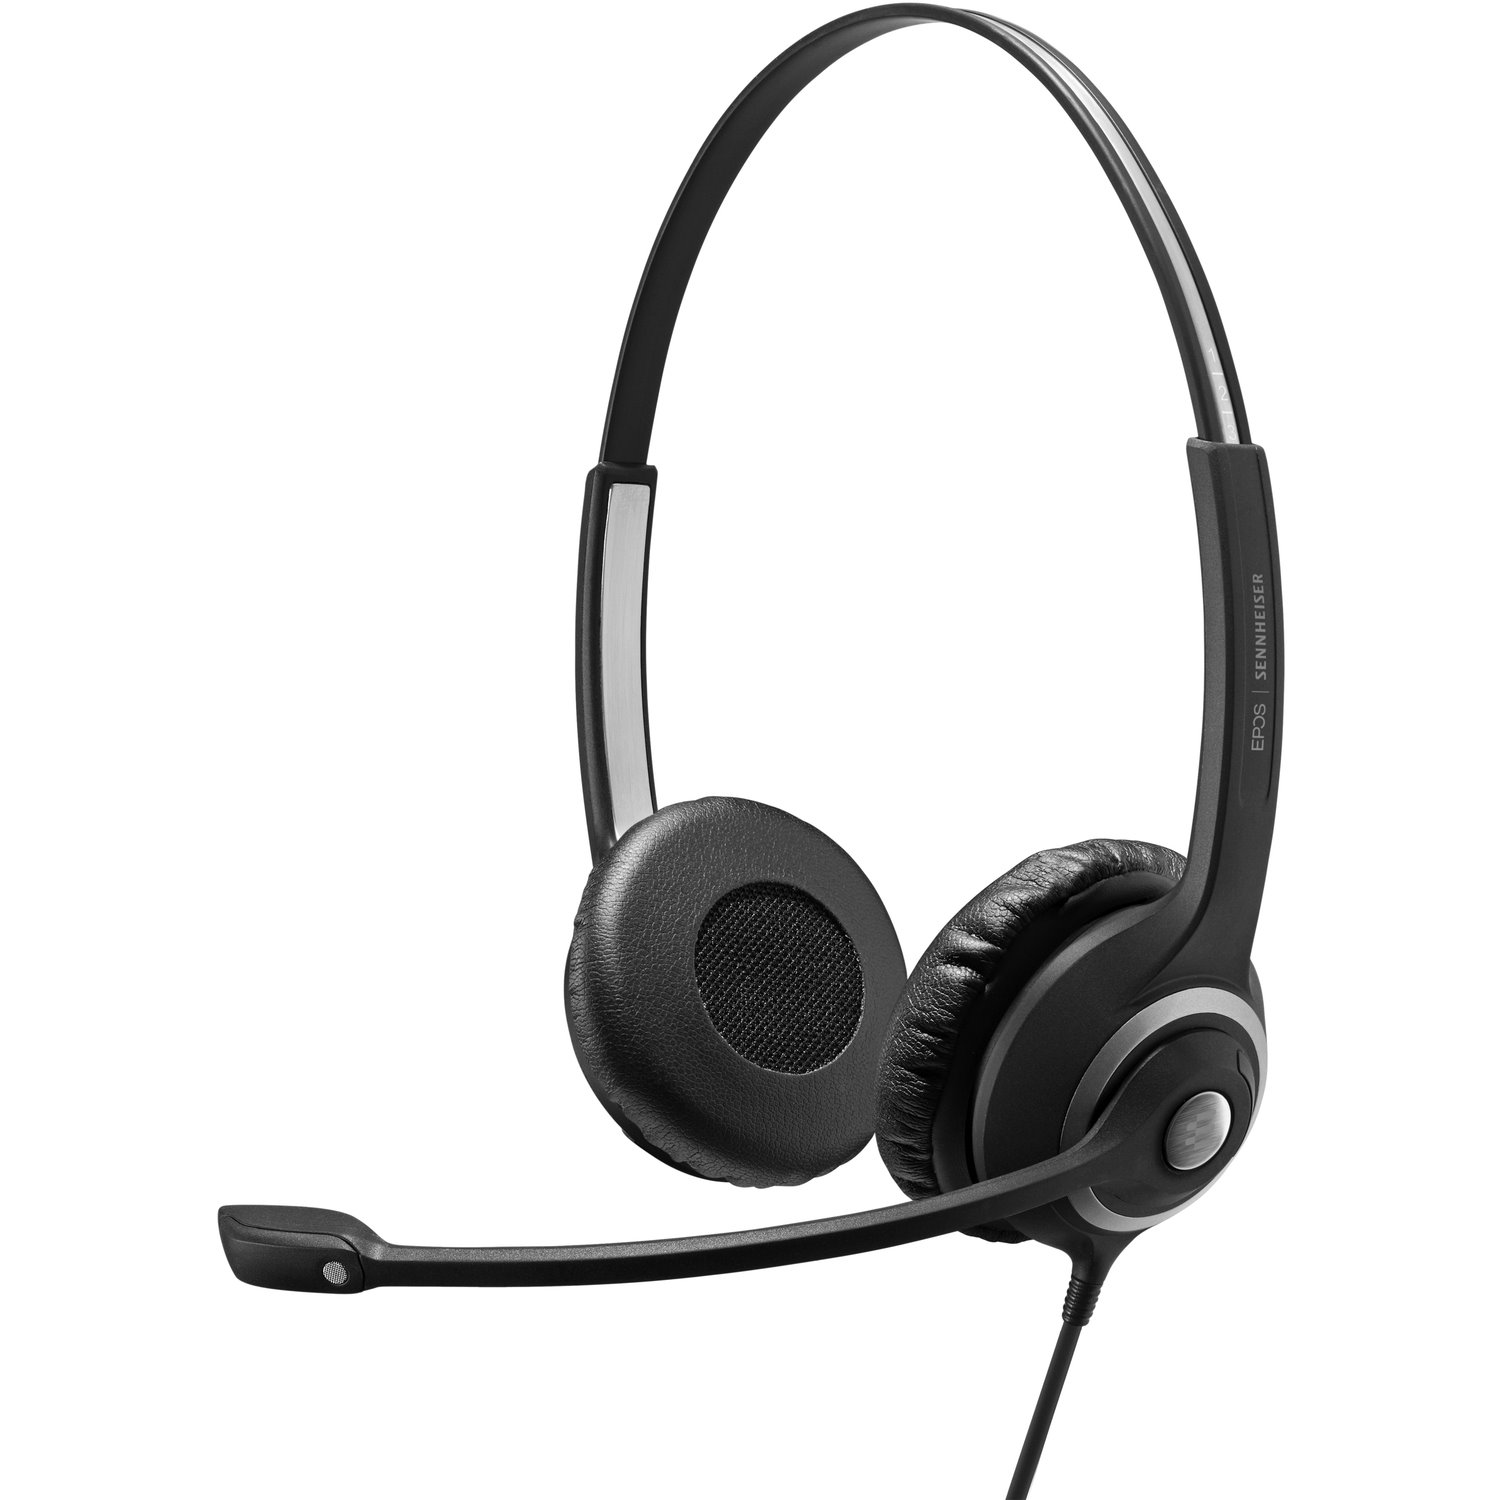 EPOS IMPACT SC 268 Wired On-ear Stereo Headset - Black